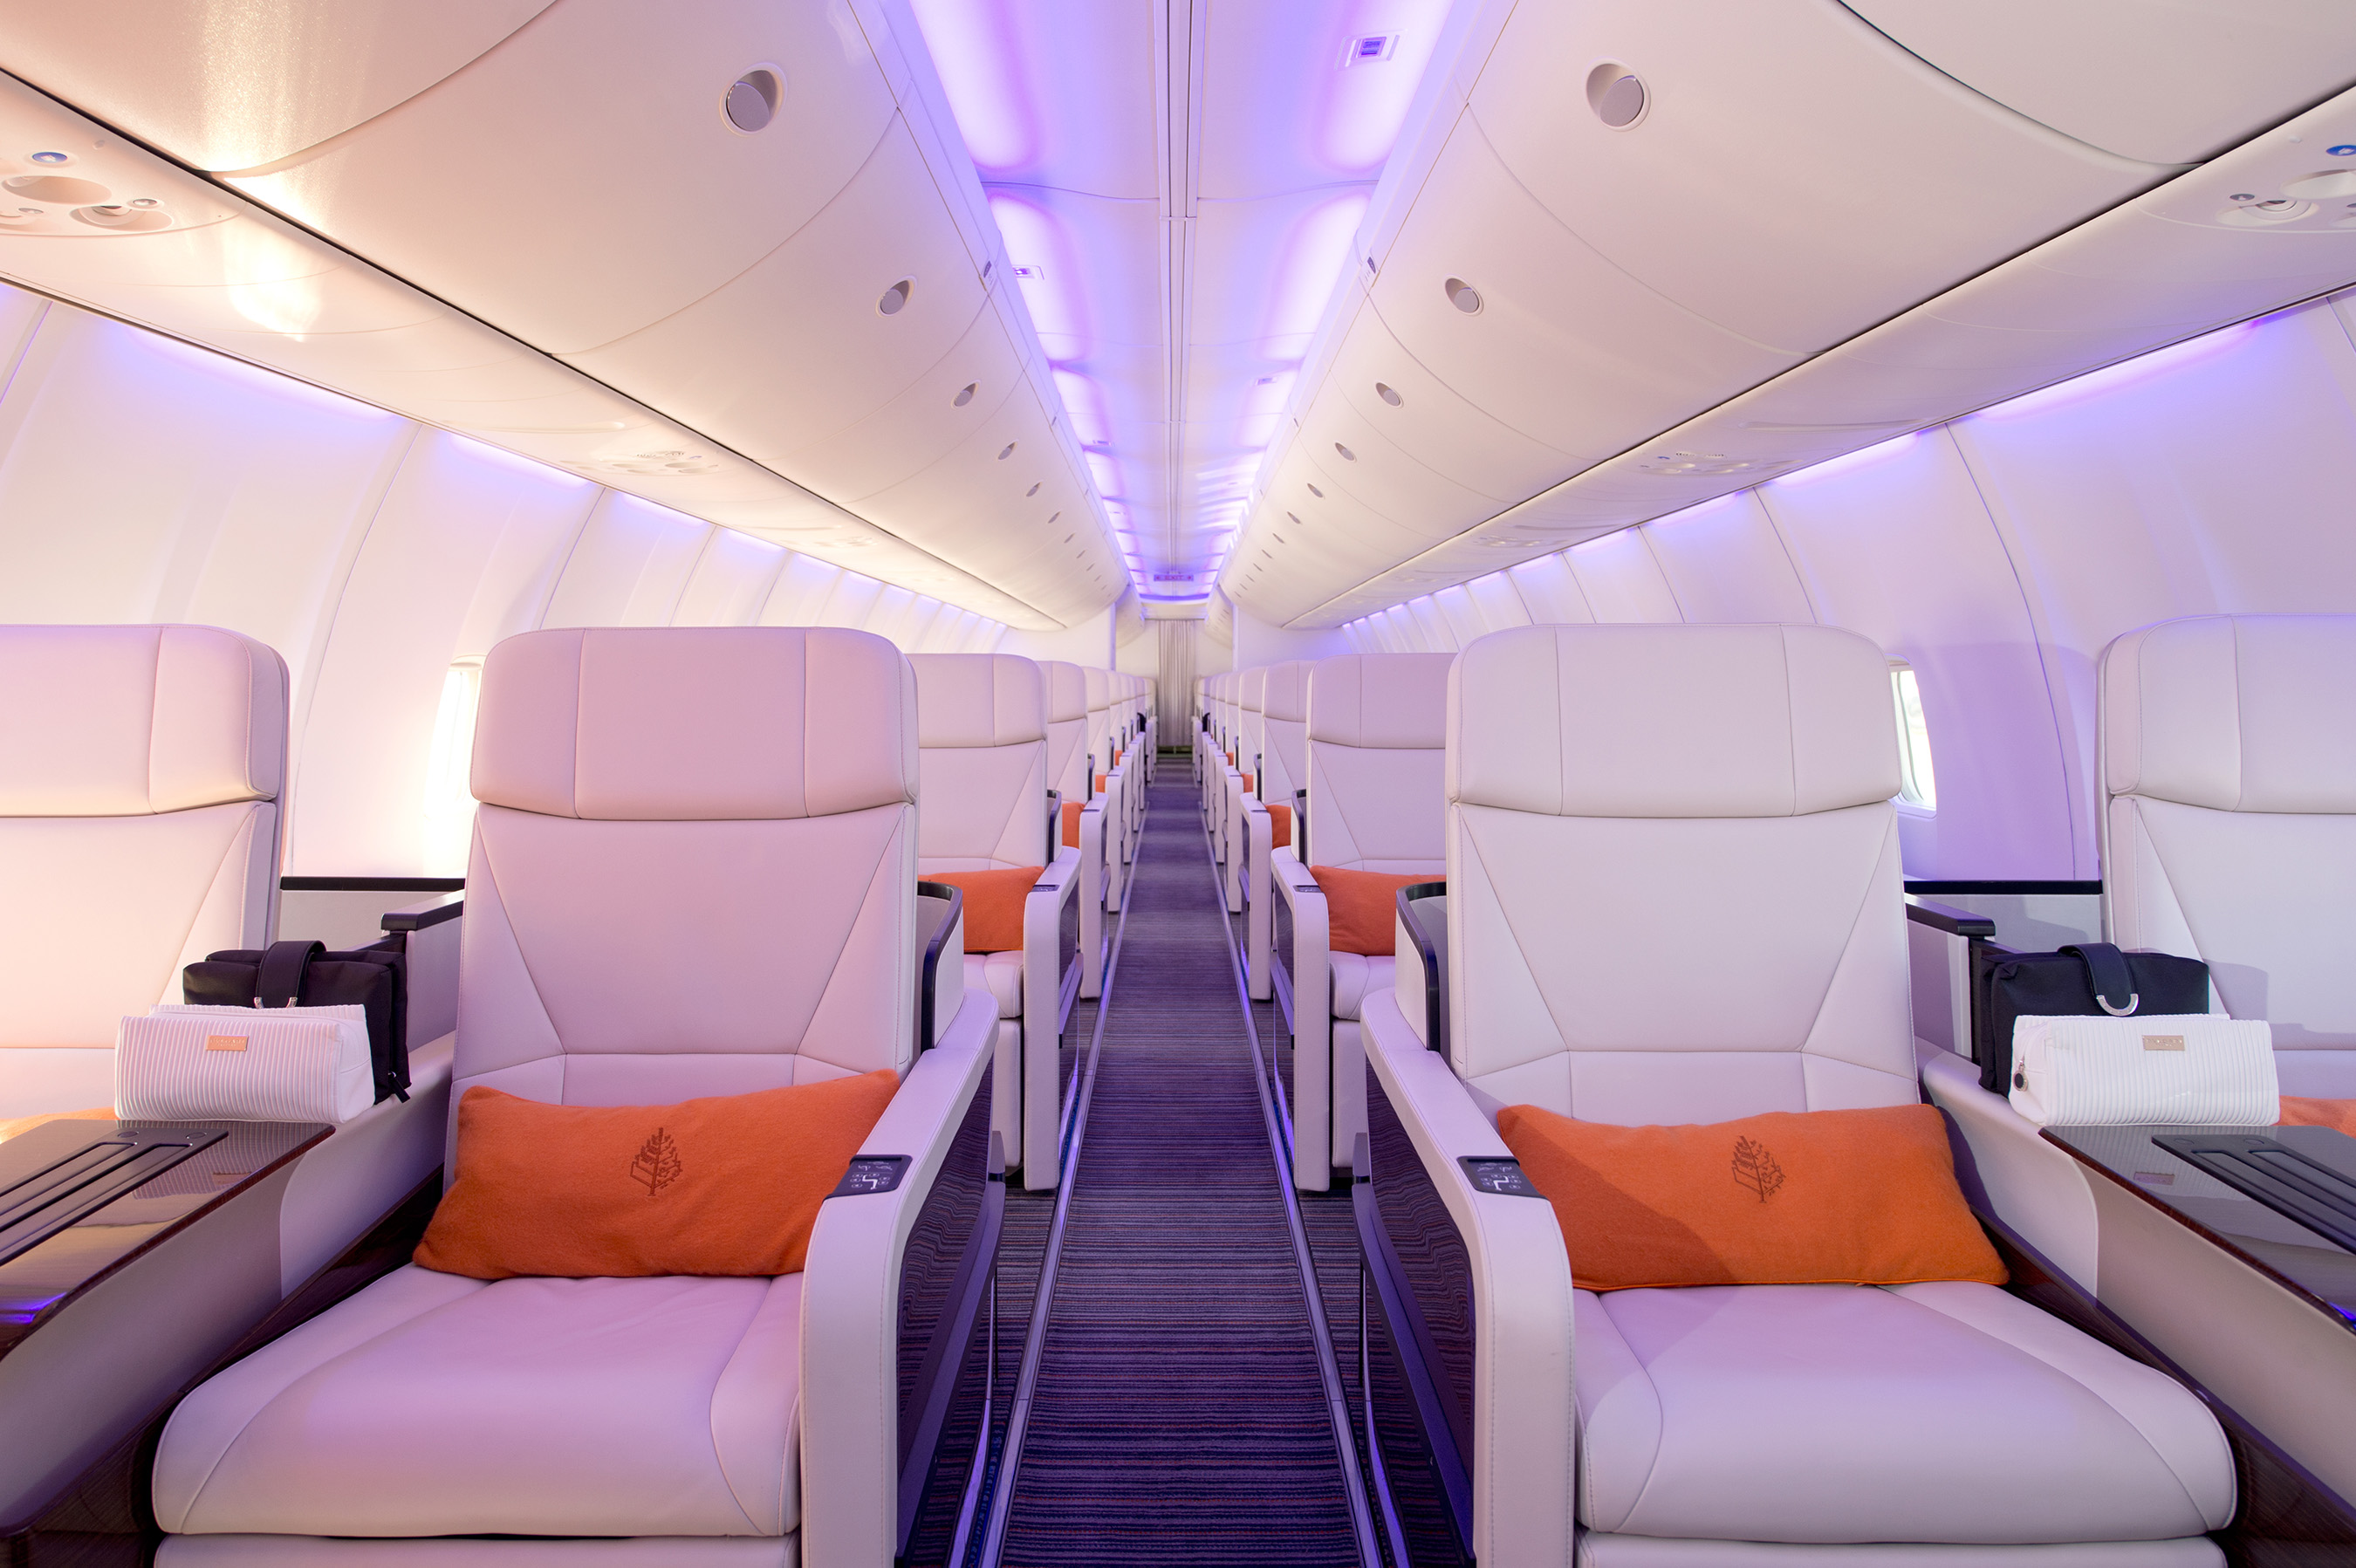 Contemporary design combined with. luxurious finishes is featured throughout the aircraft. The interior is light and fresh, featuring carefully placed contrasts in colour palette and texture.